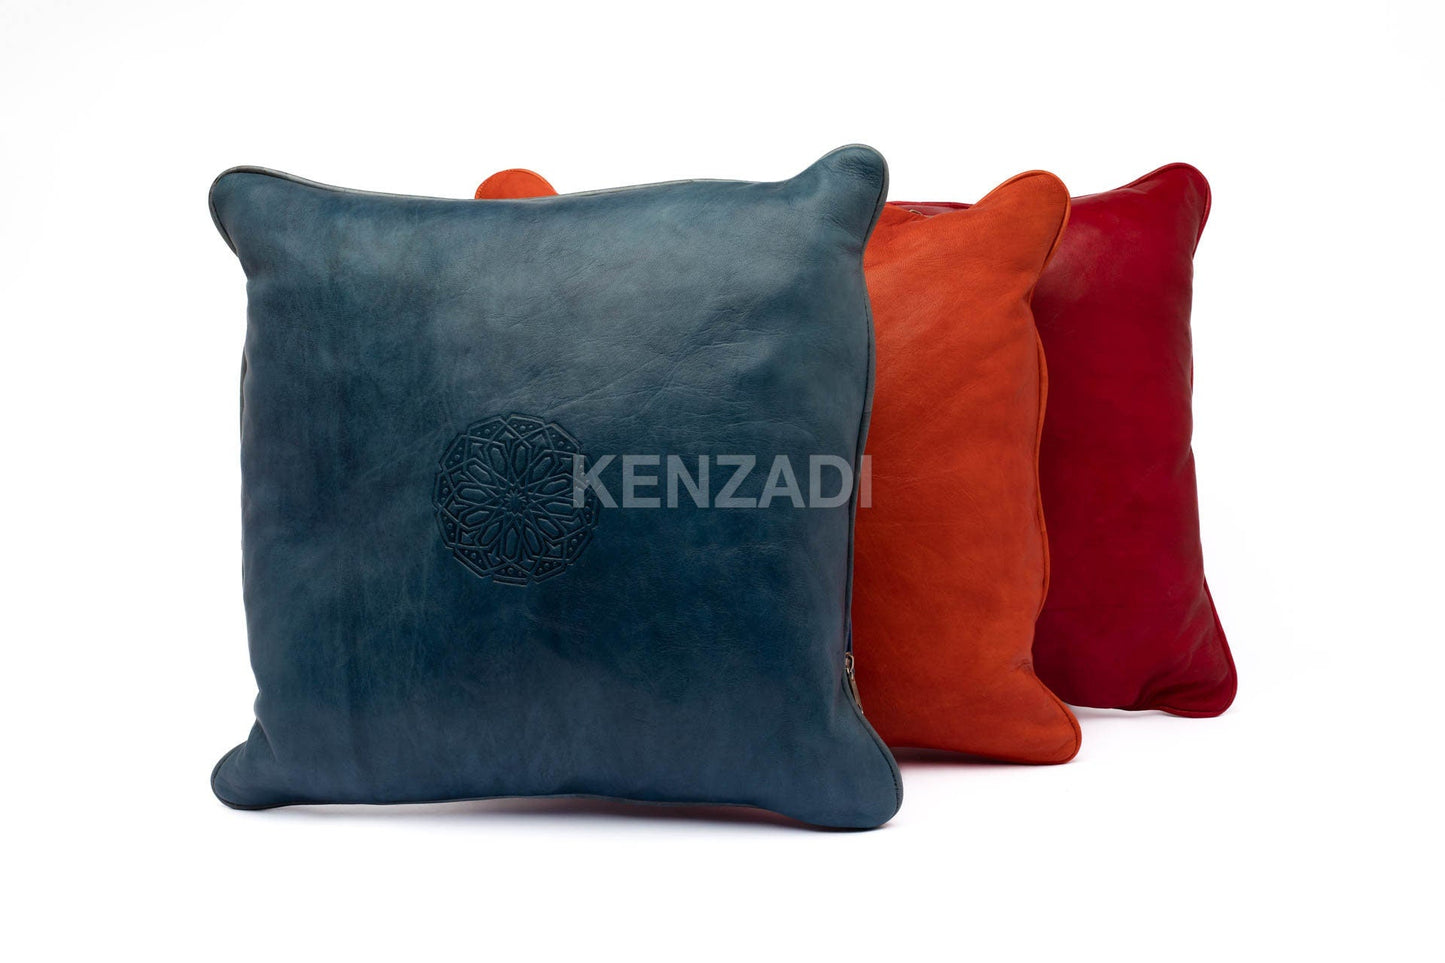 Handmade Moroccan orange leather pillowcase - a stylish and versatile decor piece for indoor and outdoor use.